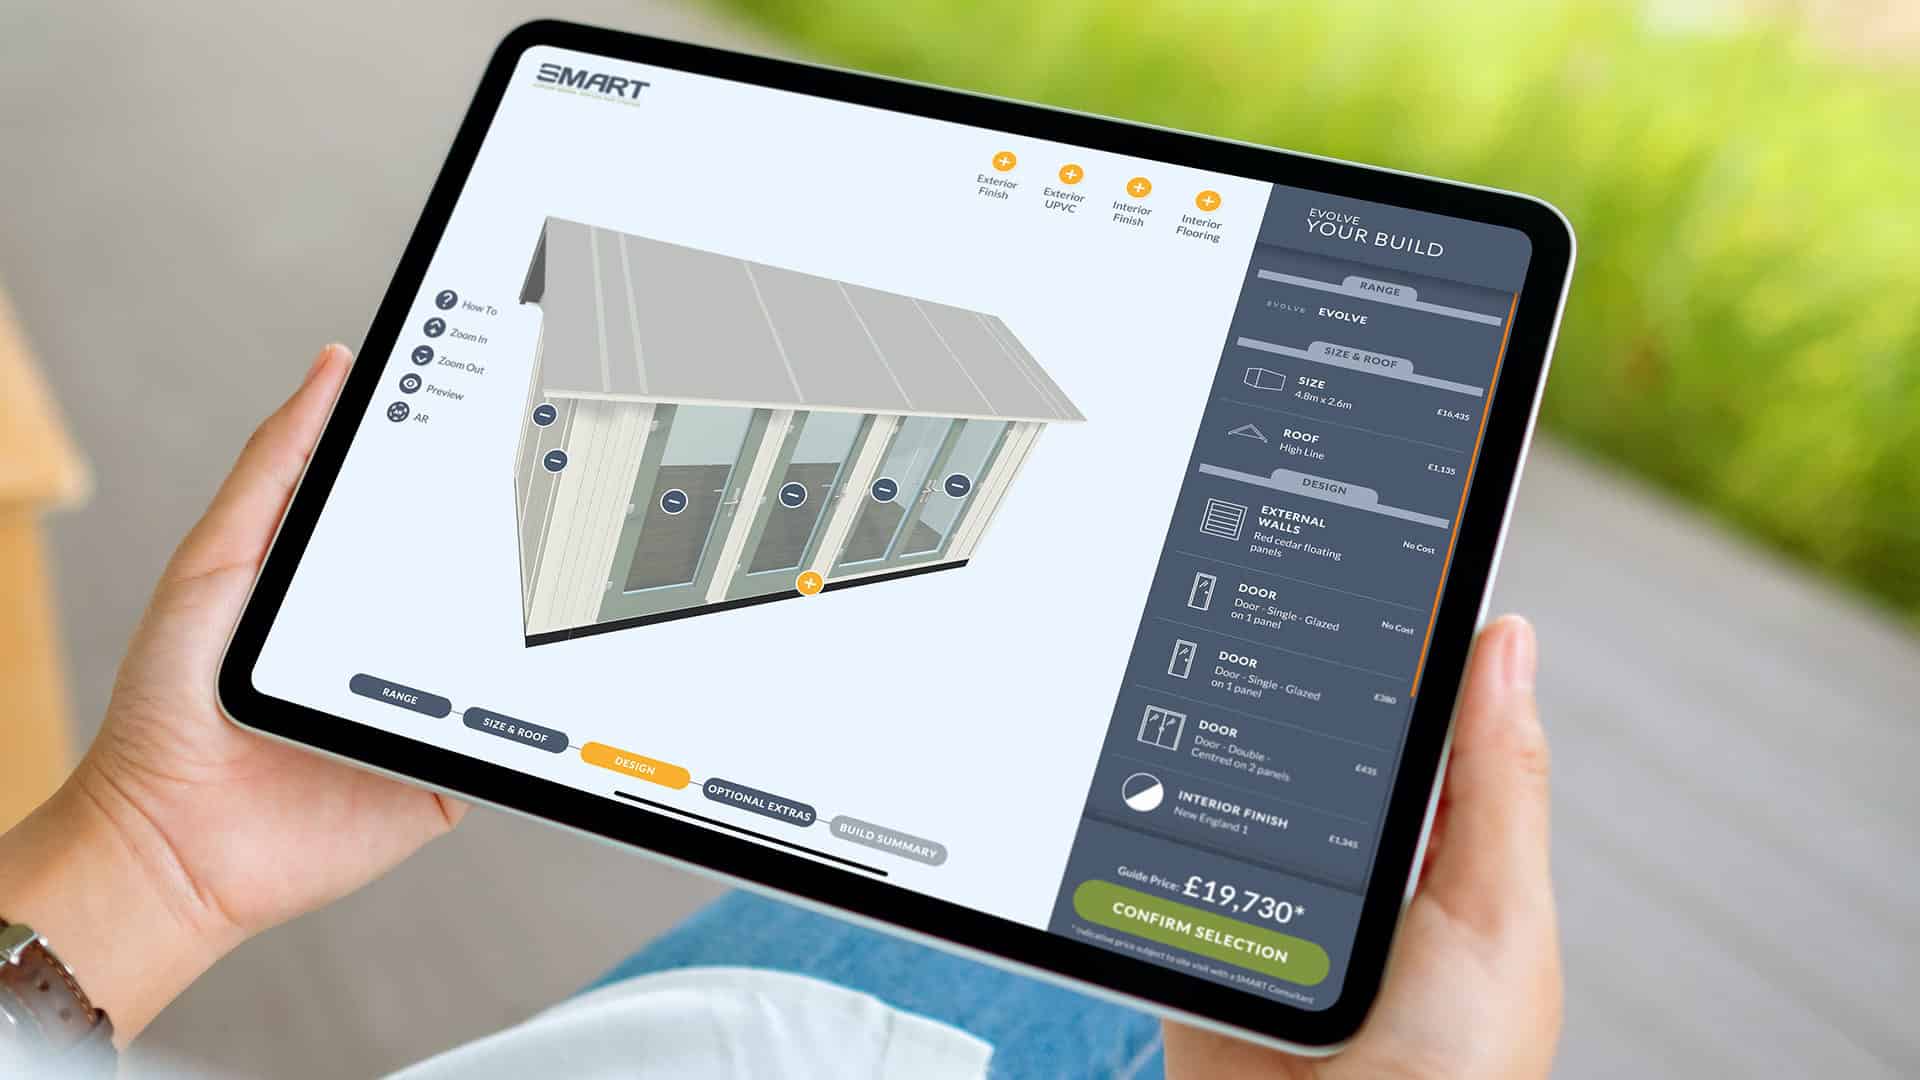 Someone using the smartgarden configurator app on a tablet.